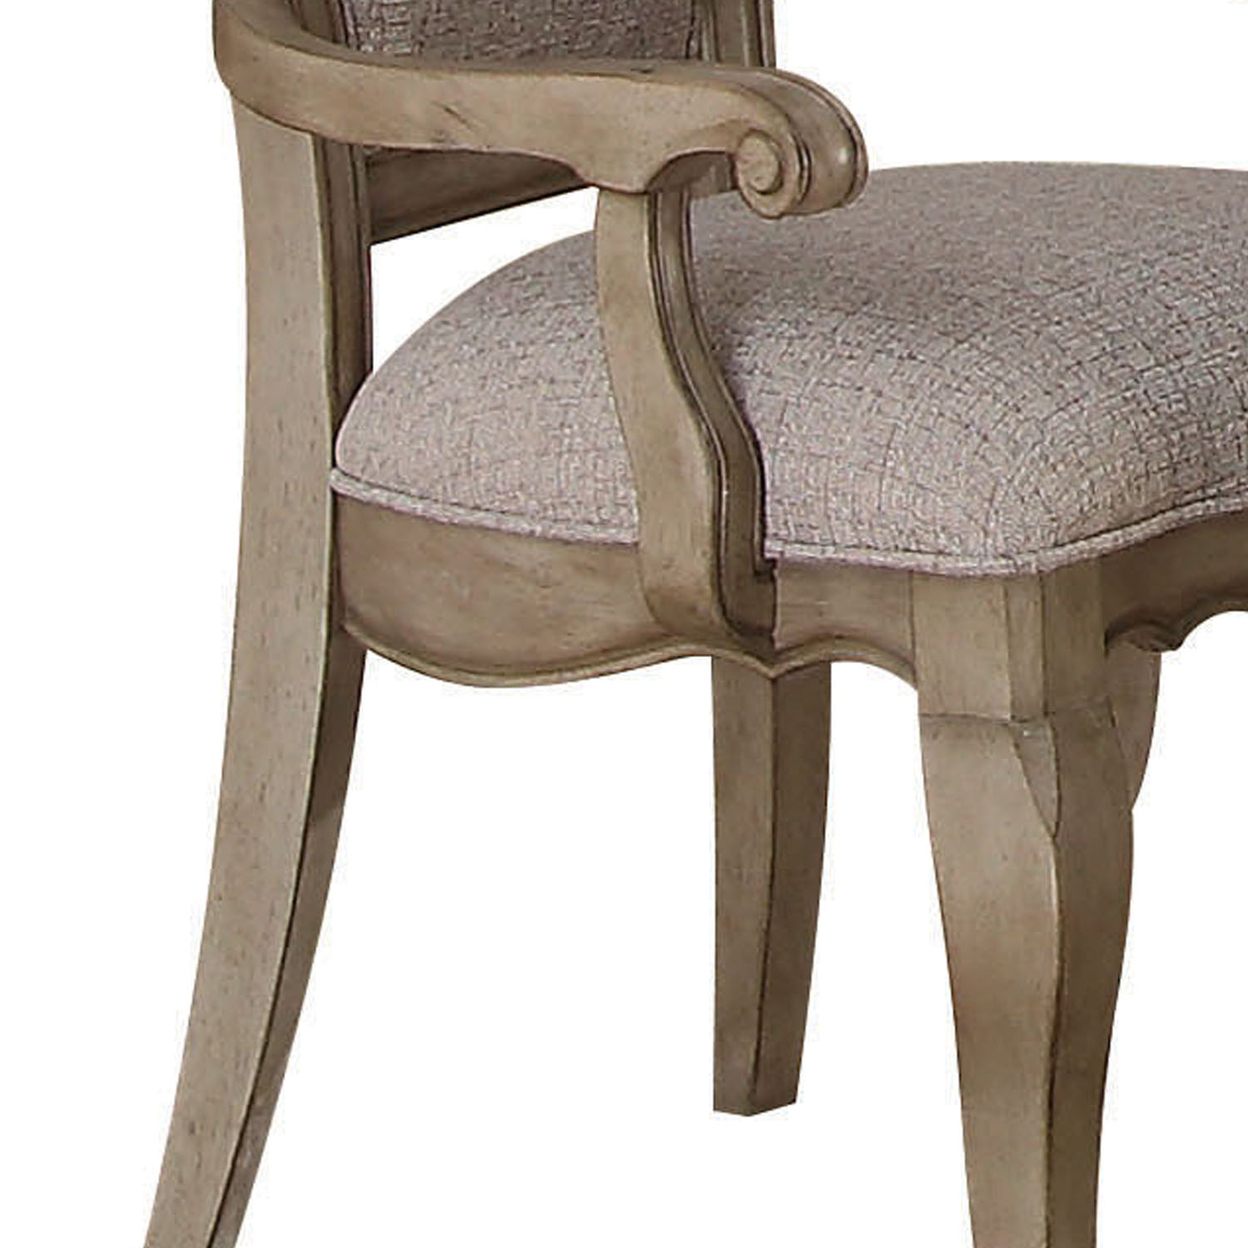 Wooden Arm Chairs With Button Tufting, Set Of Two, Gray And Brown- Saltoro Sherpi